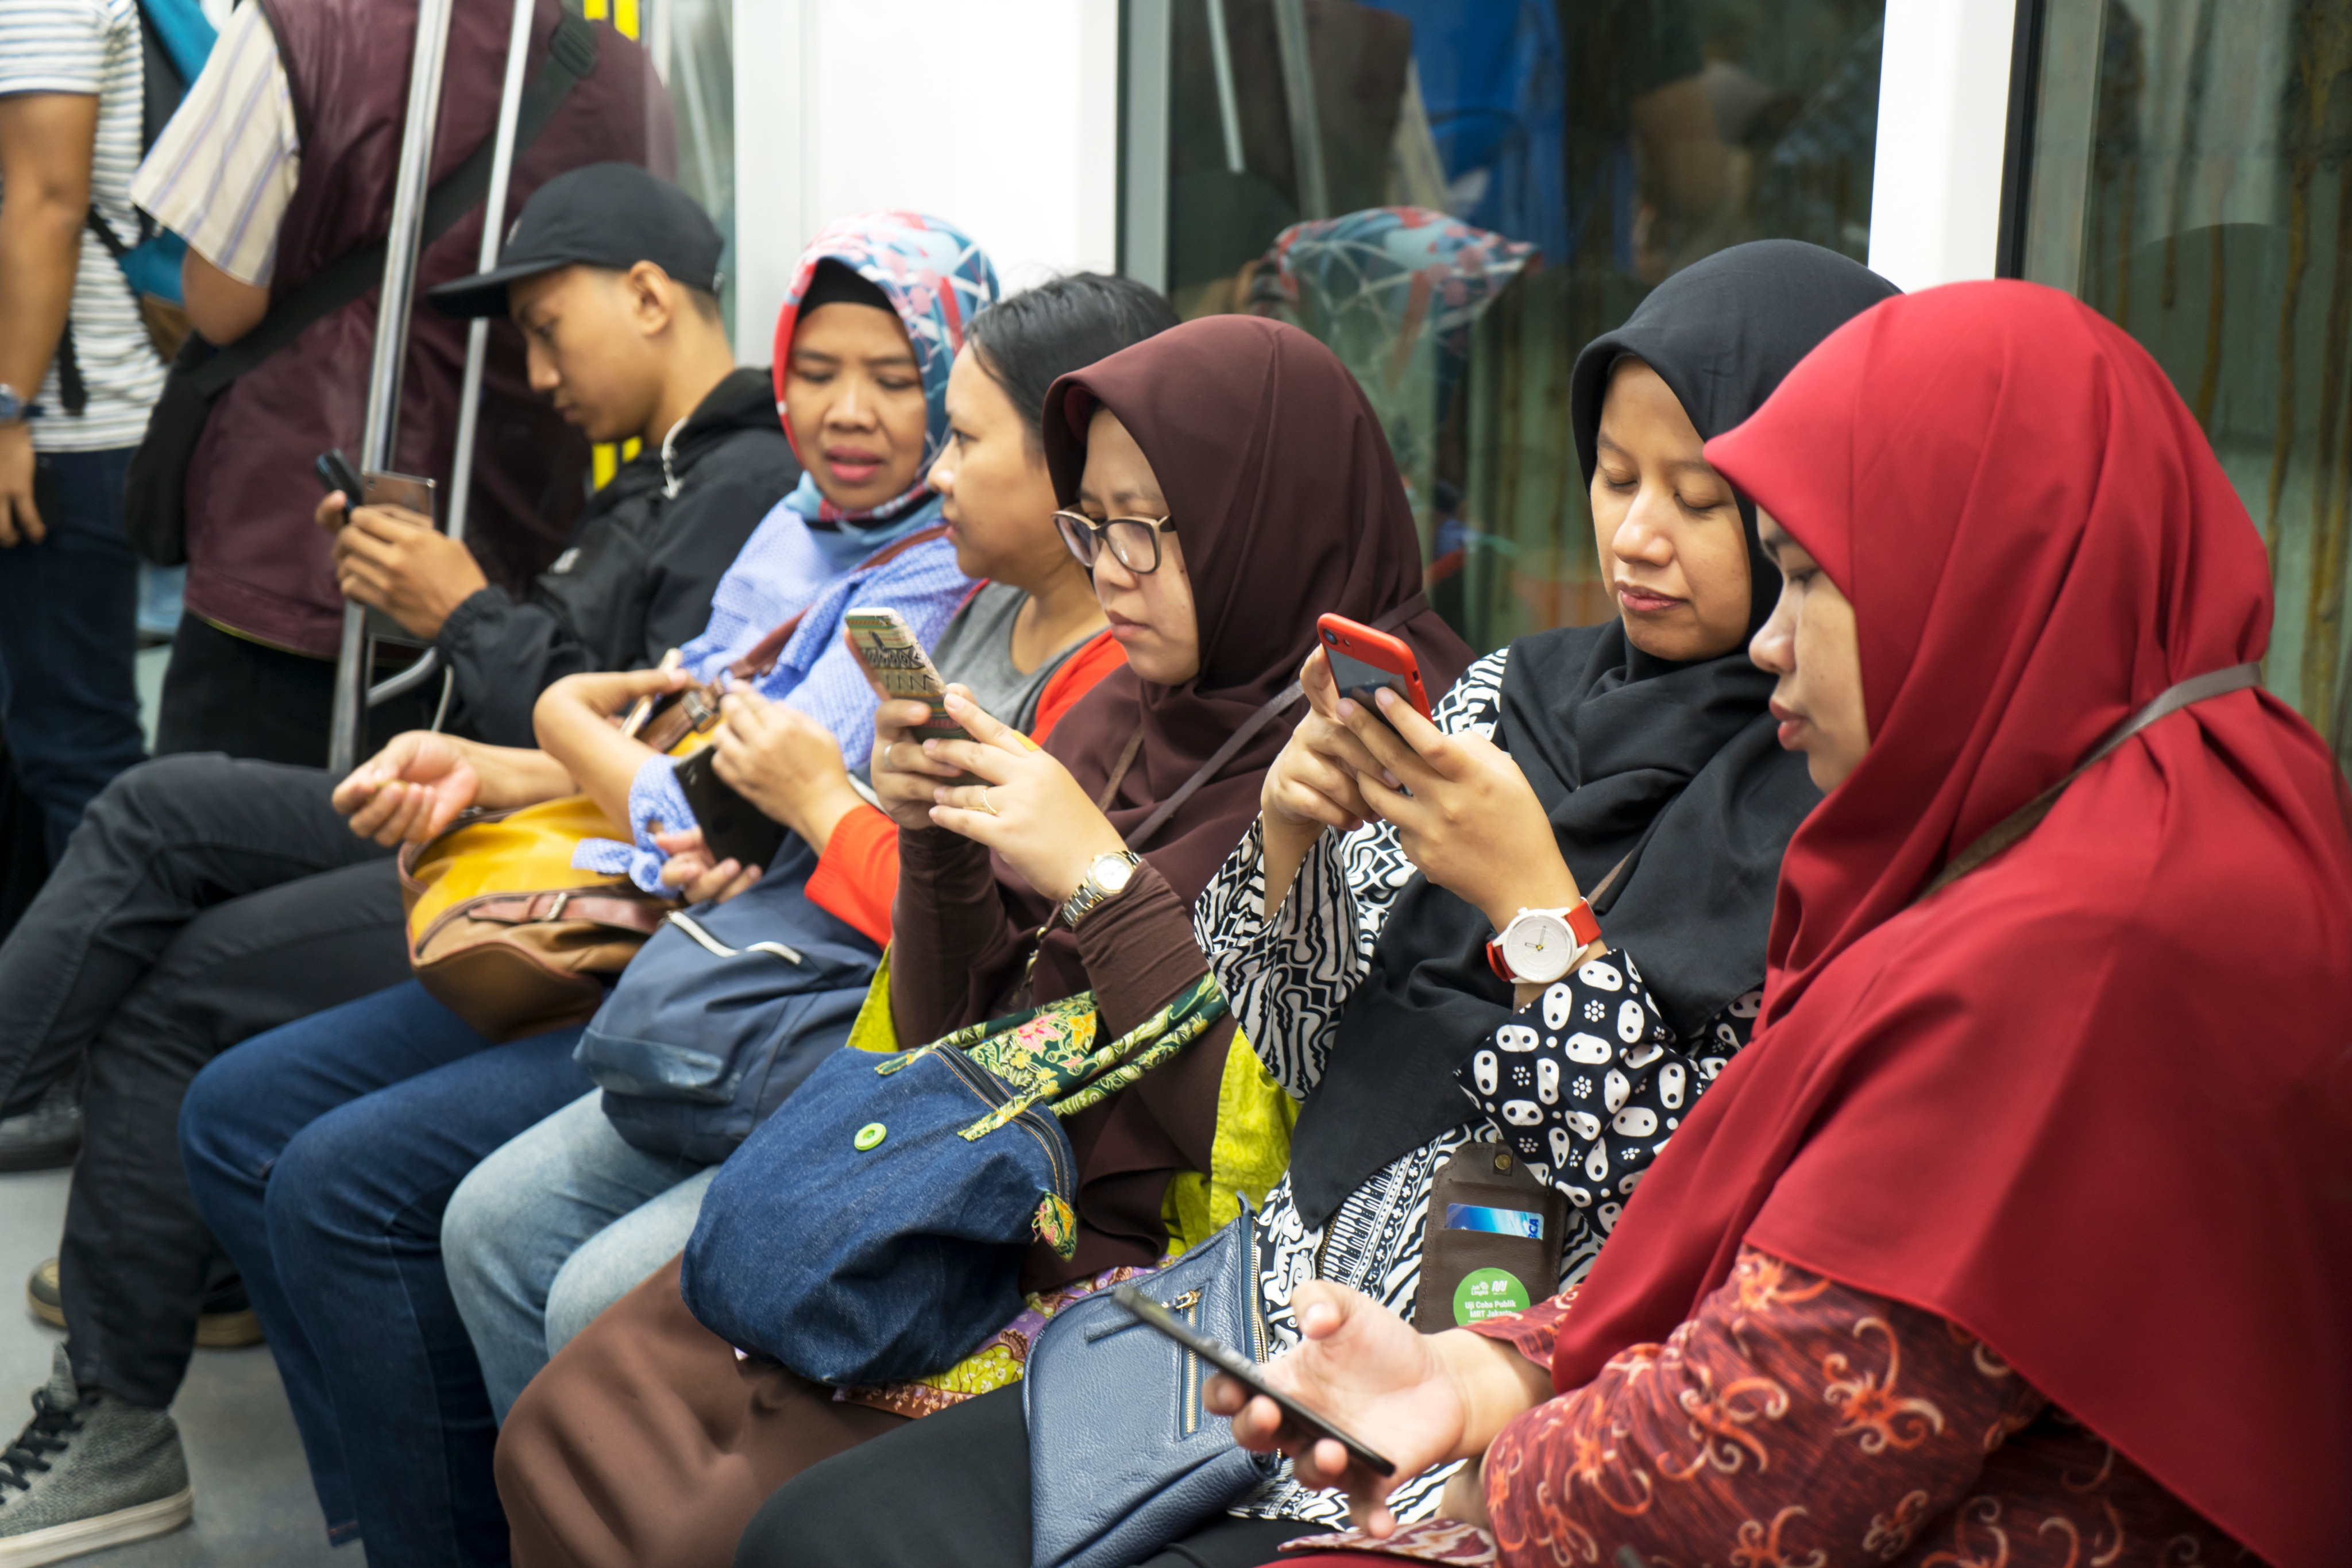 Indonesians use their smartphones during their commute on Jakarta’s MRT. Photo: Shutterstock